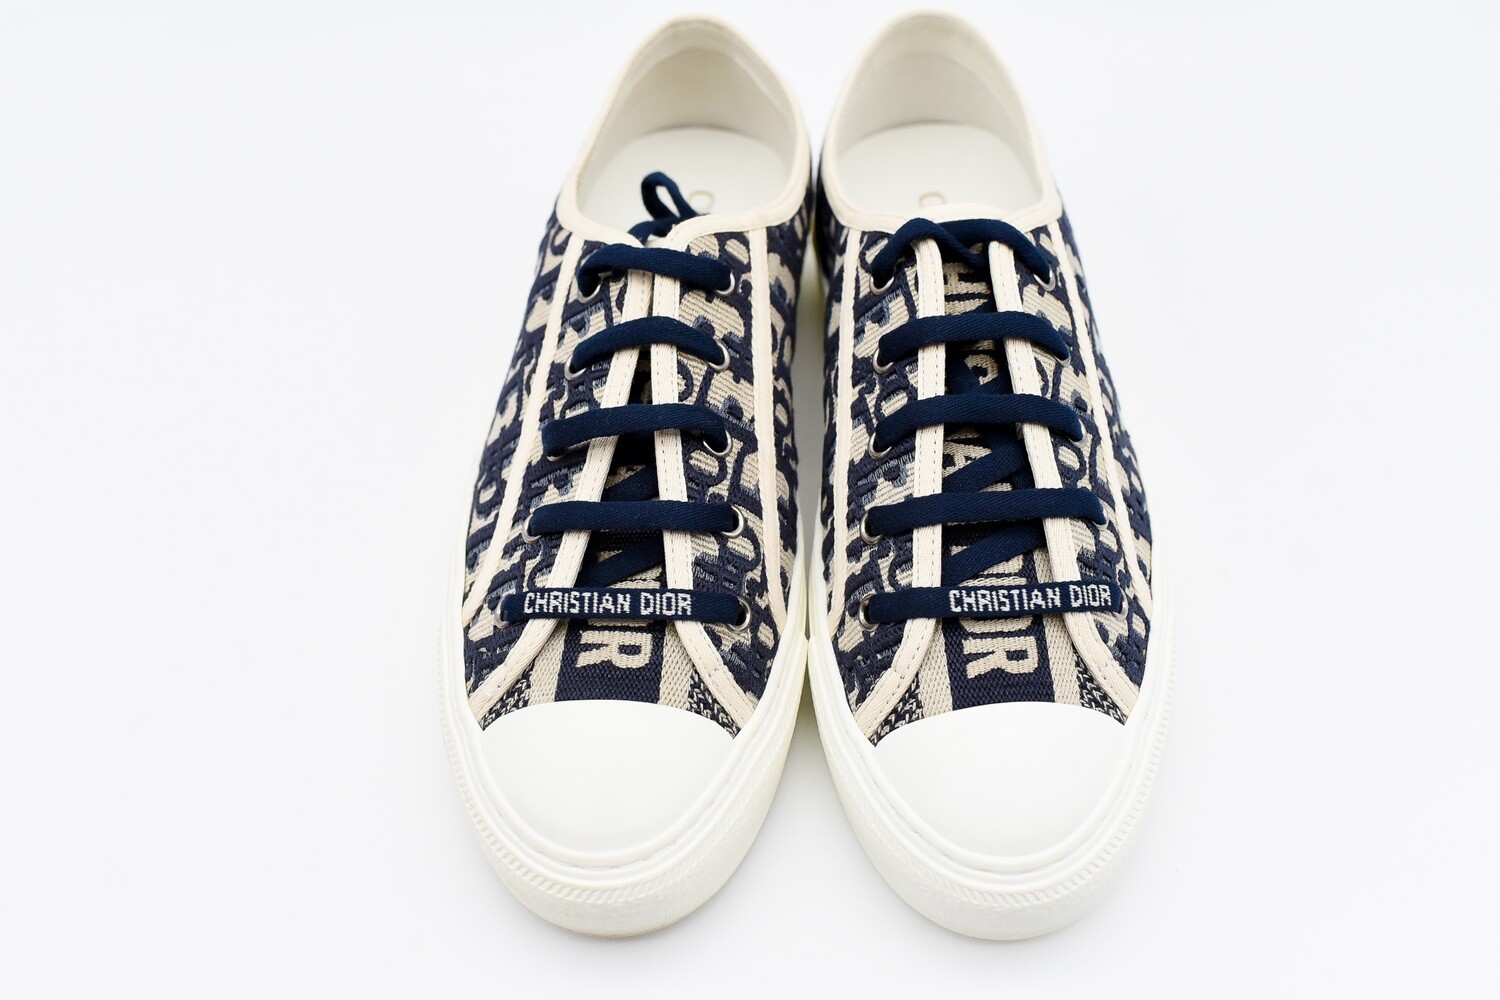 Christian Dior Shoes Sneakers, Navy and White, Size 40, New in Box GA006